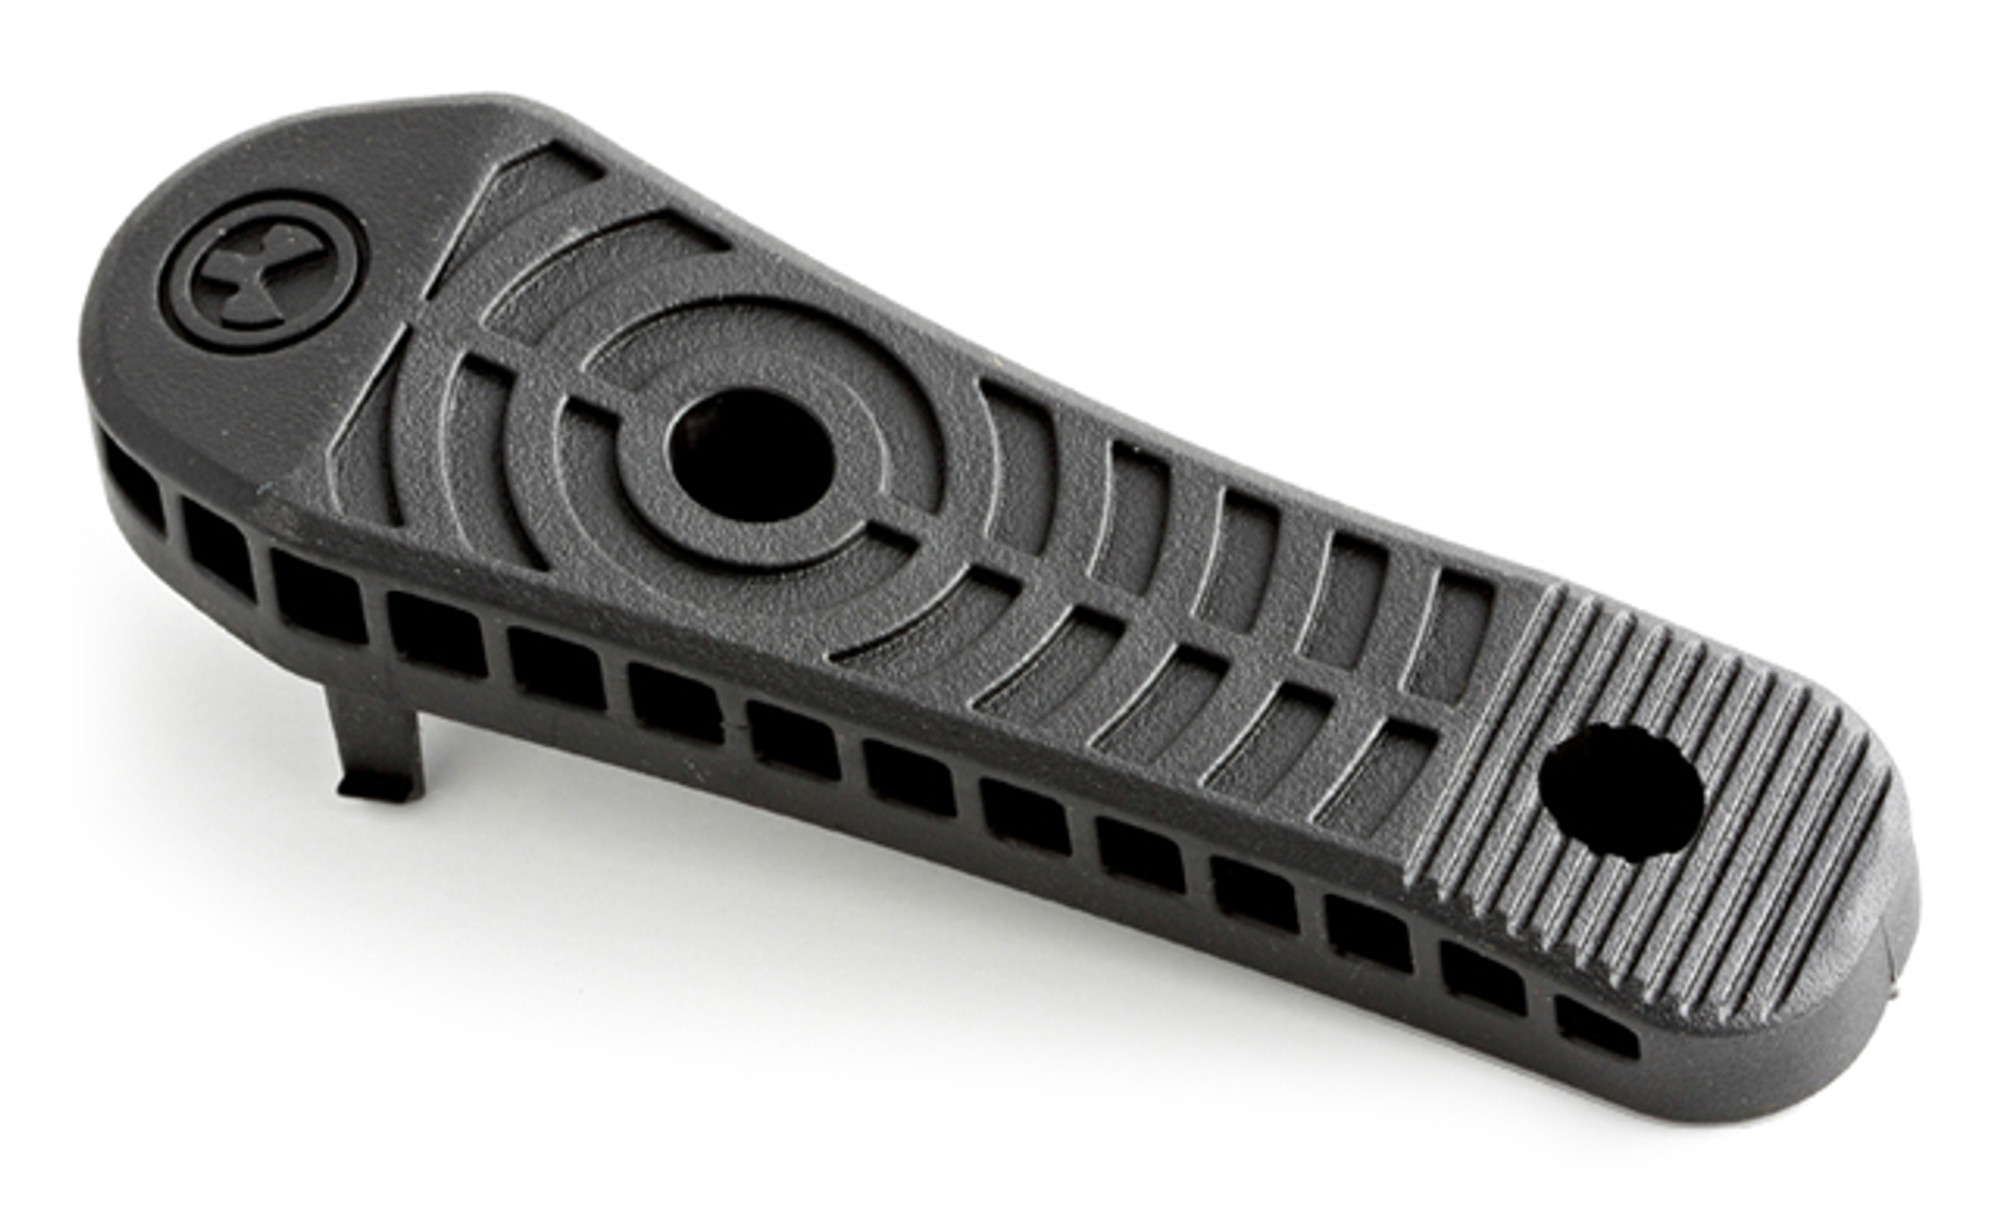 Magpul Enhanced Rubber Butt-Pad 0.70" for CTR Stocks